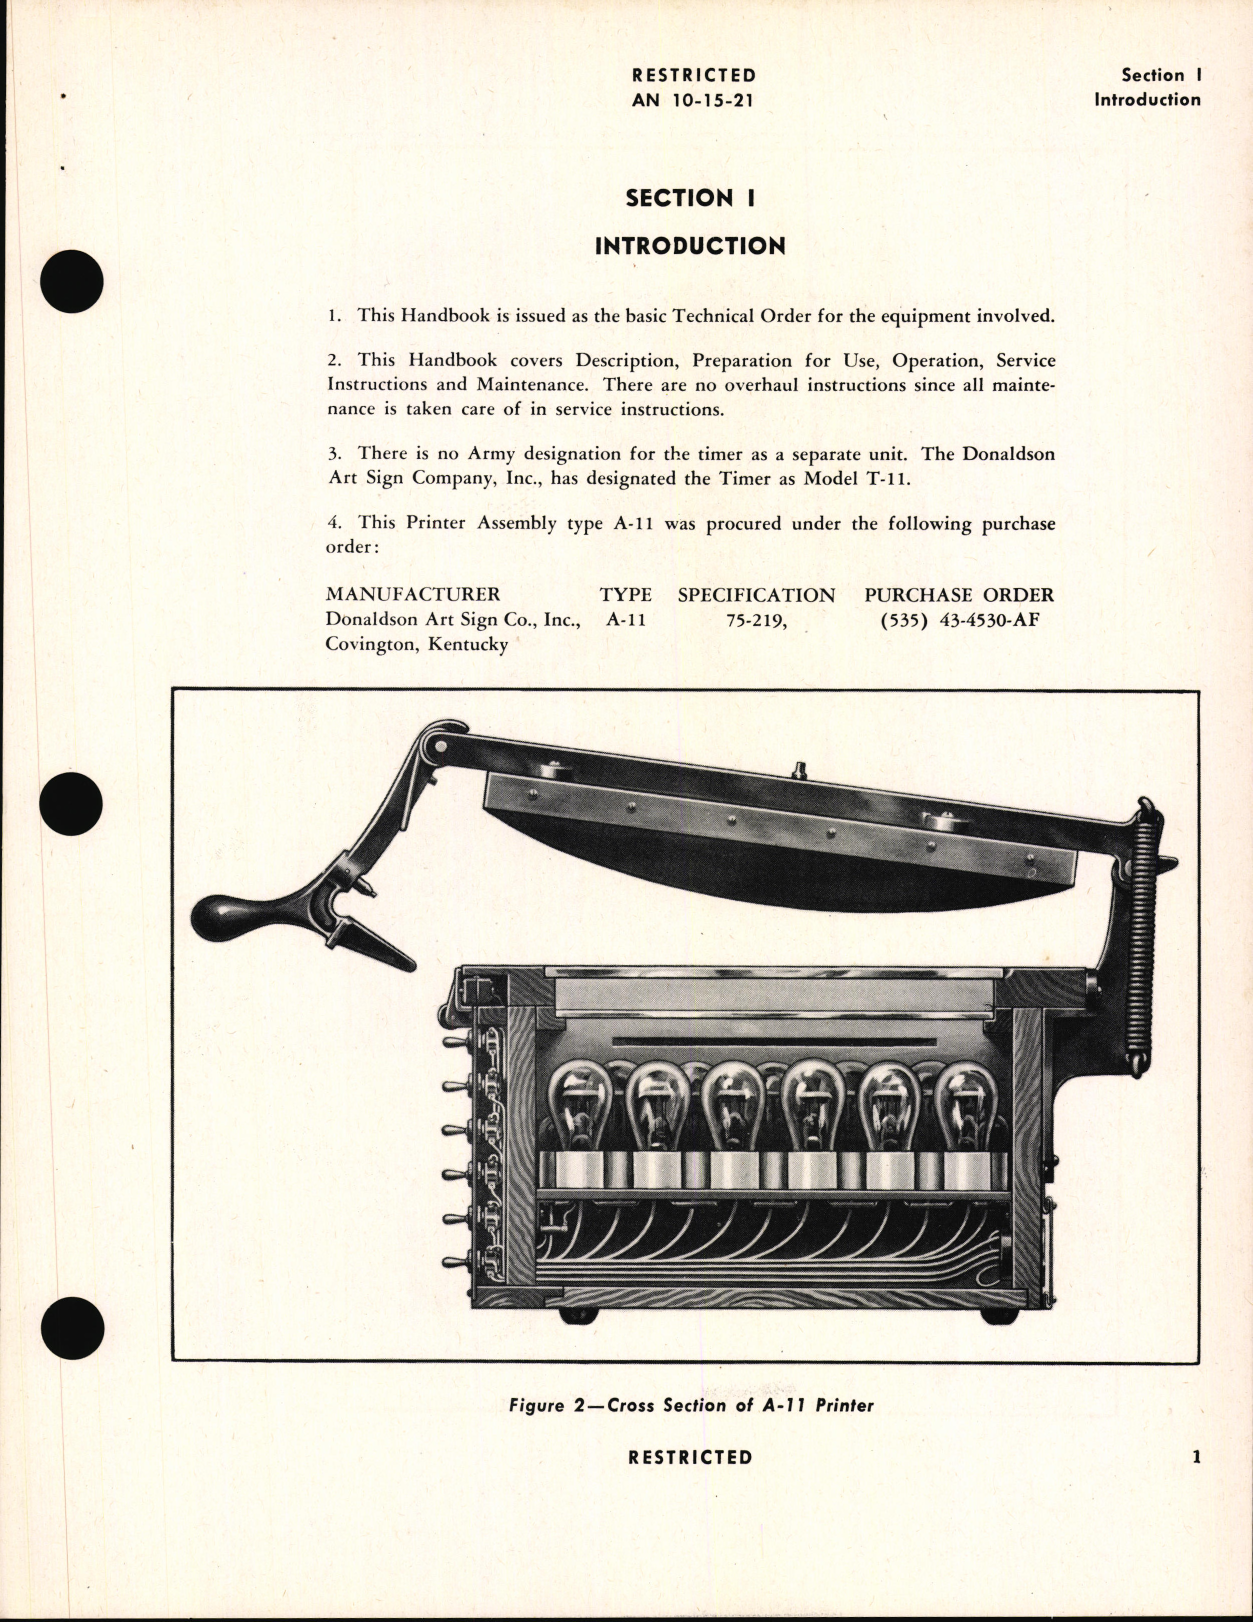 Sample page 5 from AirCorps Library document: Handbook of Instructions with Parts Catalog for Type A-11 Contact Printer